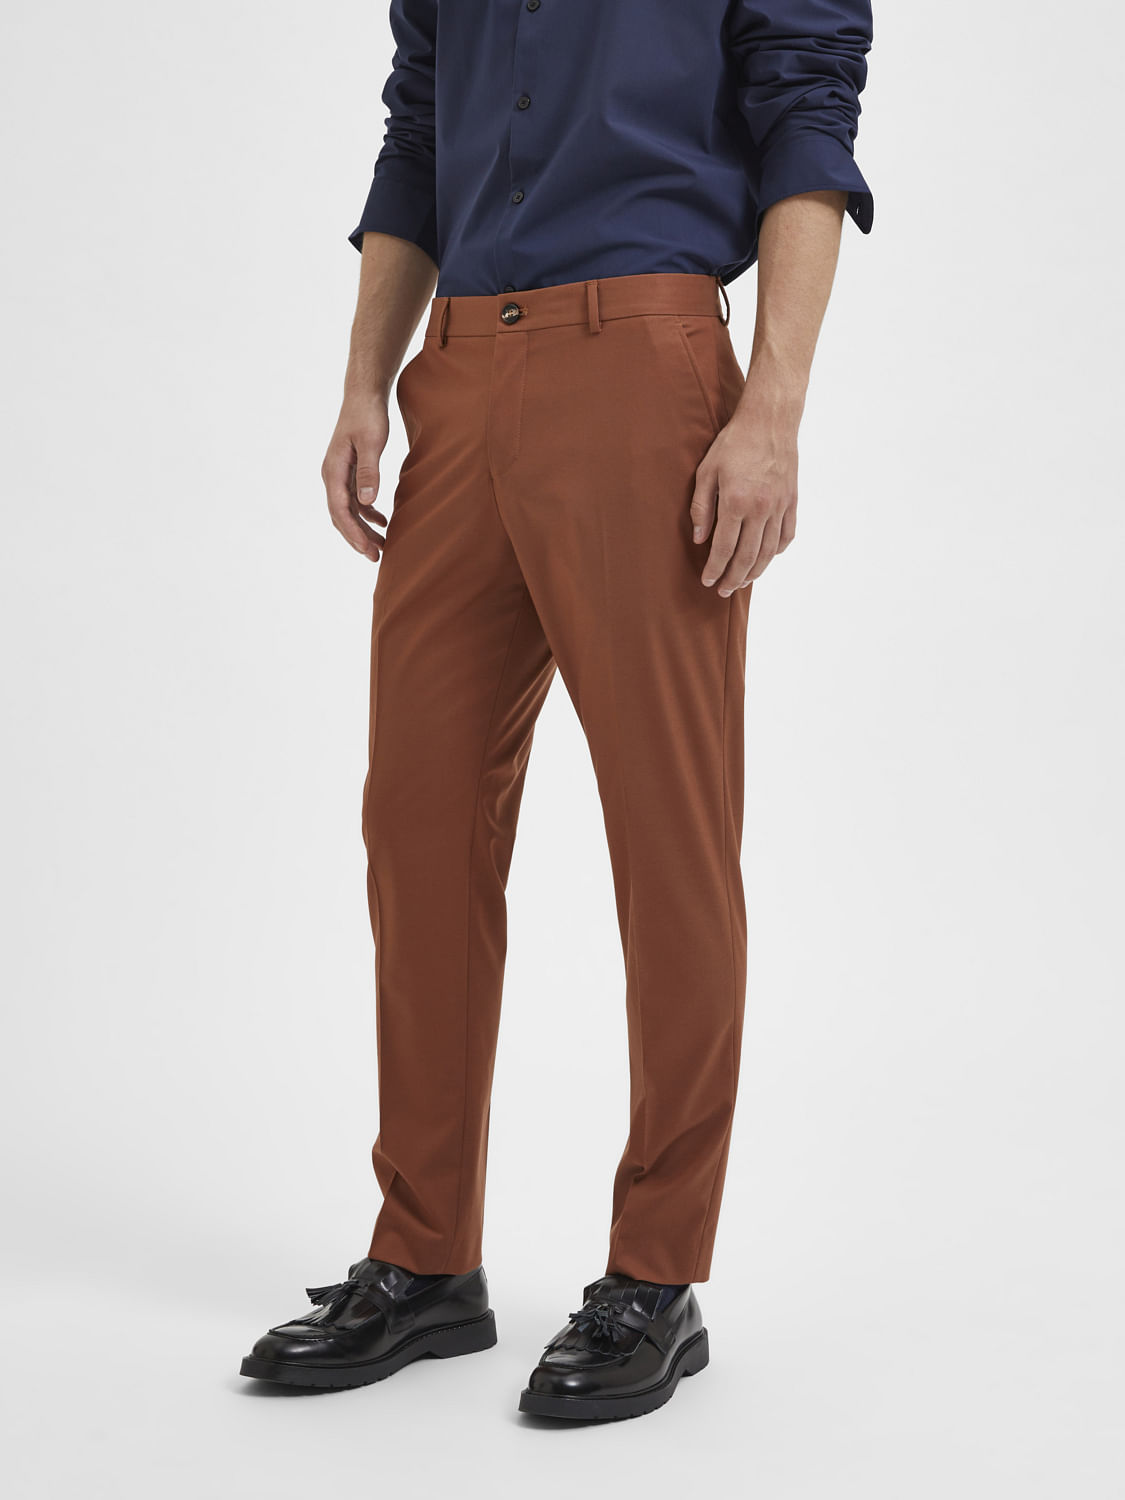 Mens Turn Up Trousers in Mens Trousers for sale  eBay